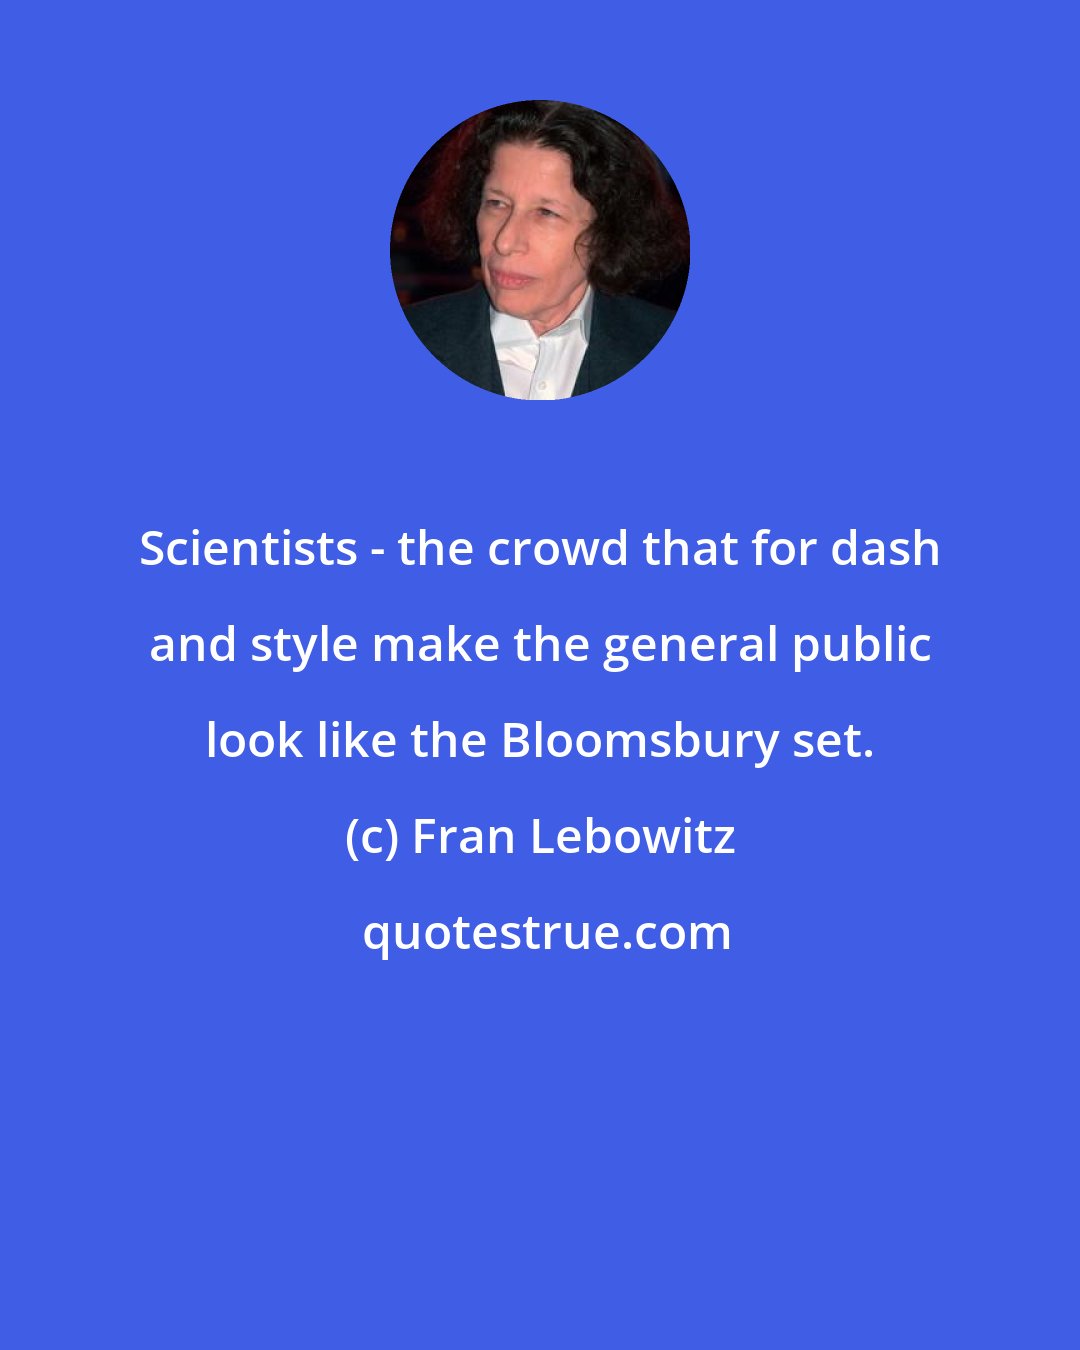 Fran Lebowitz: Scientists - the crowd that for dash and style make the general public look like the Bloomsbury set.